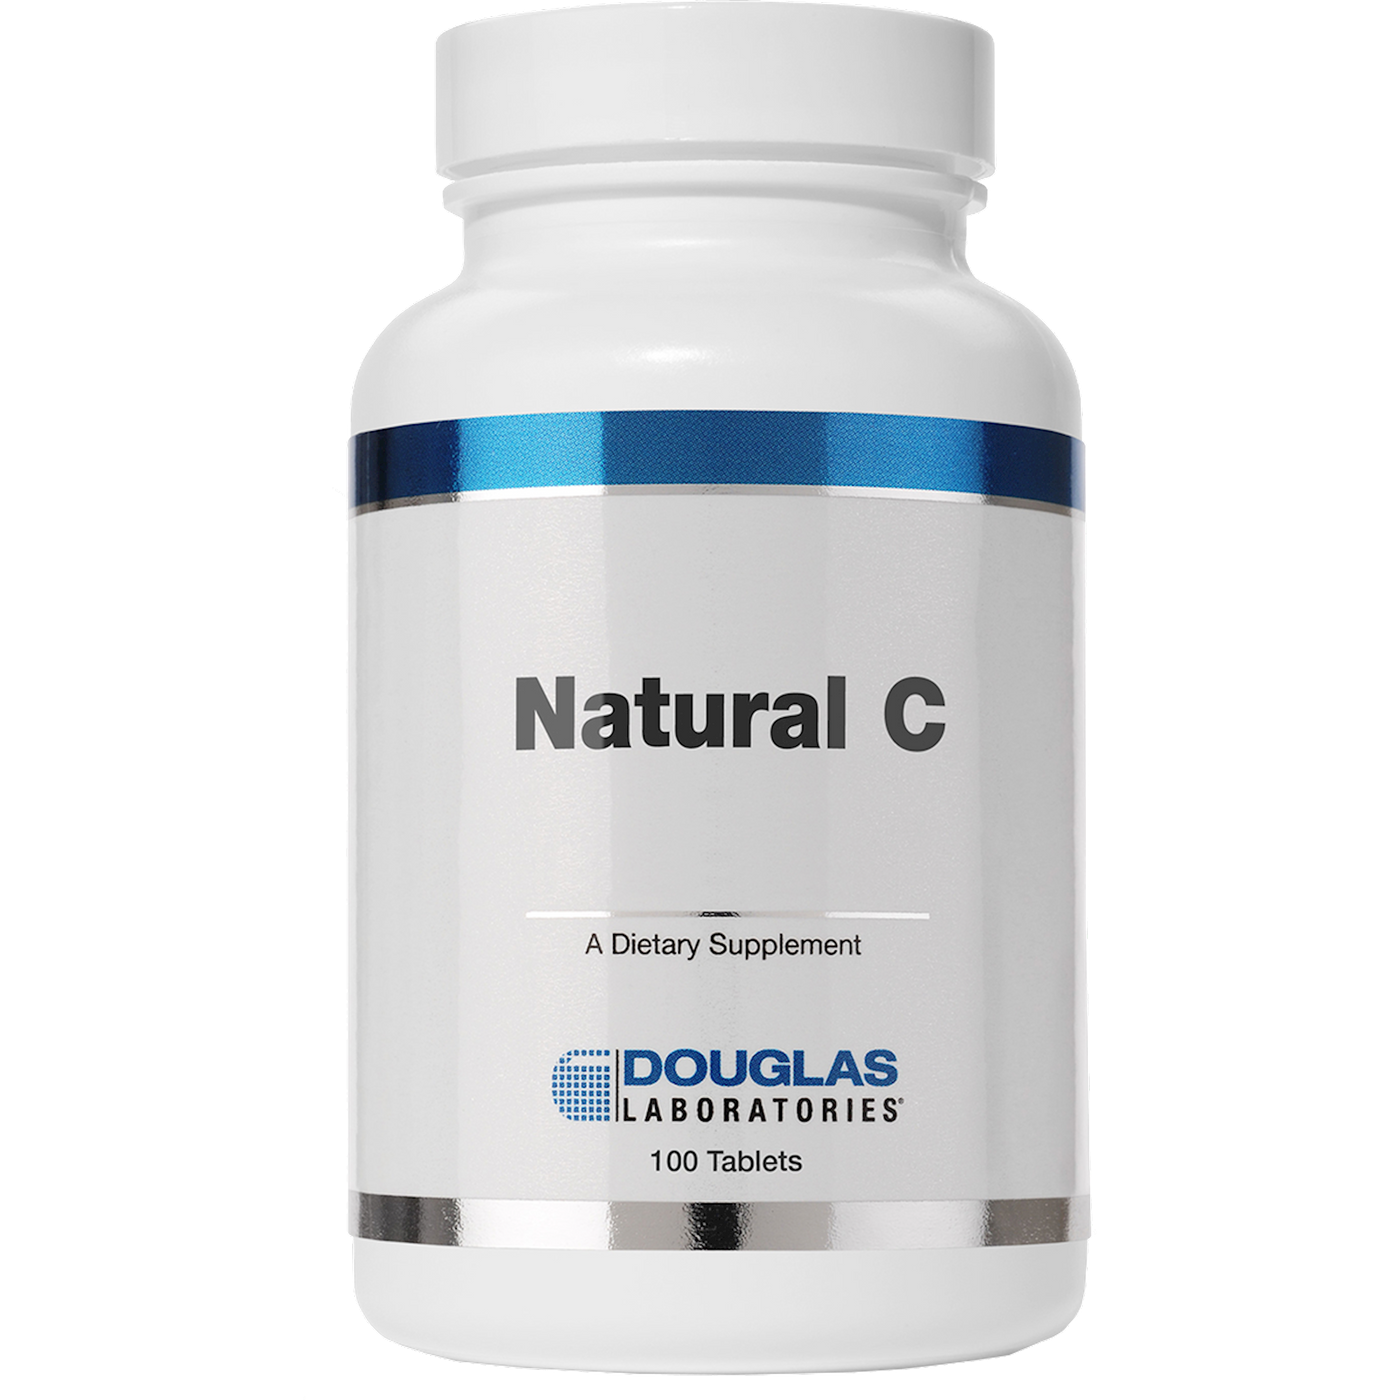 Natural C 1000 mg  Curated Wellness